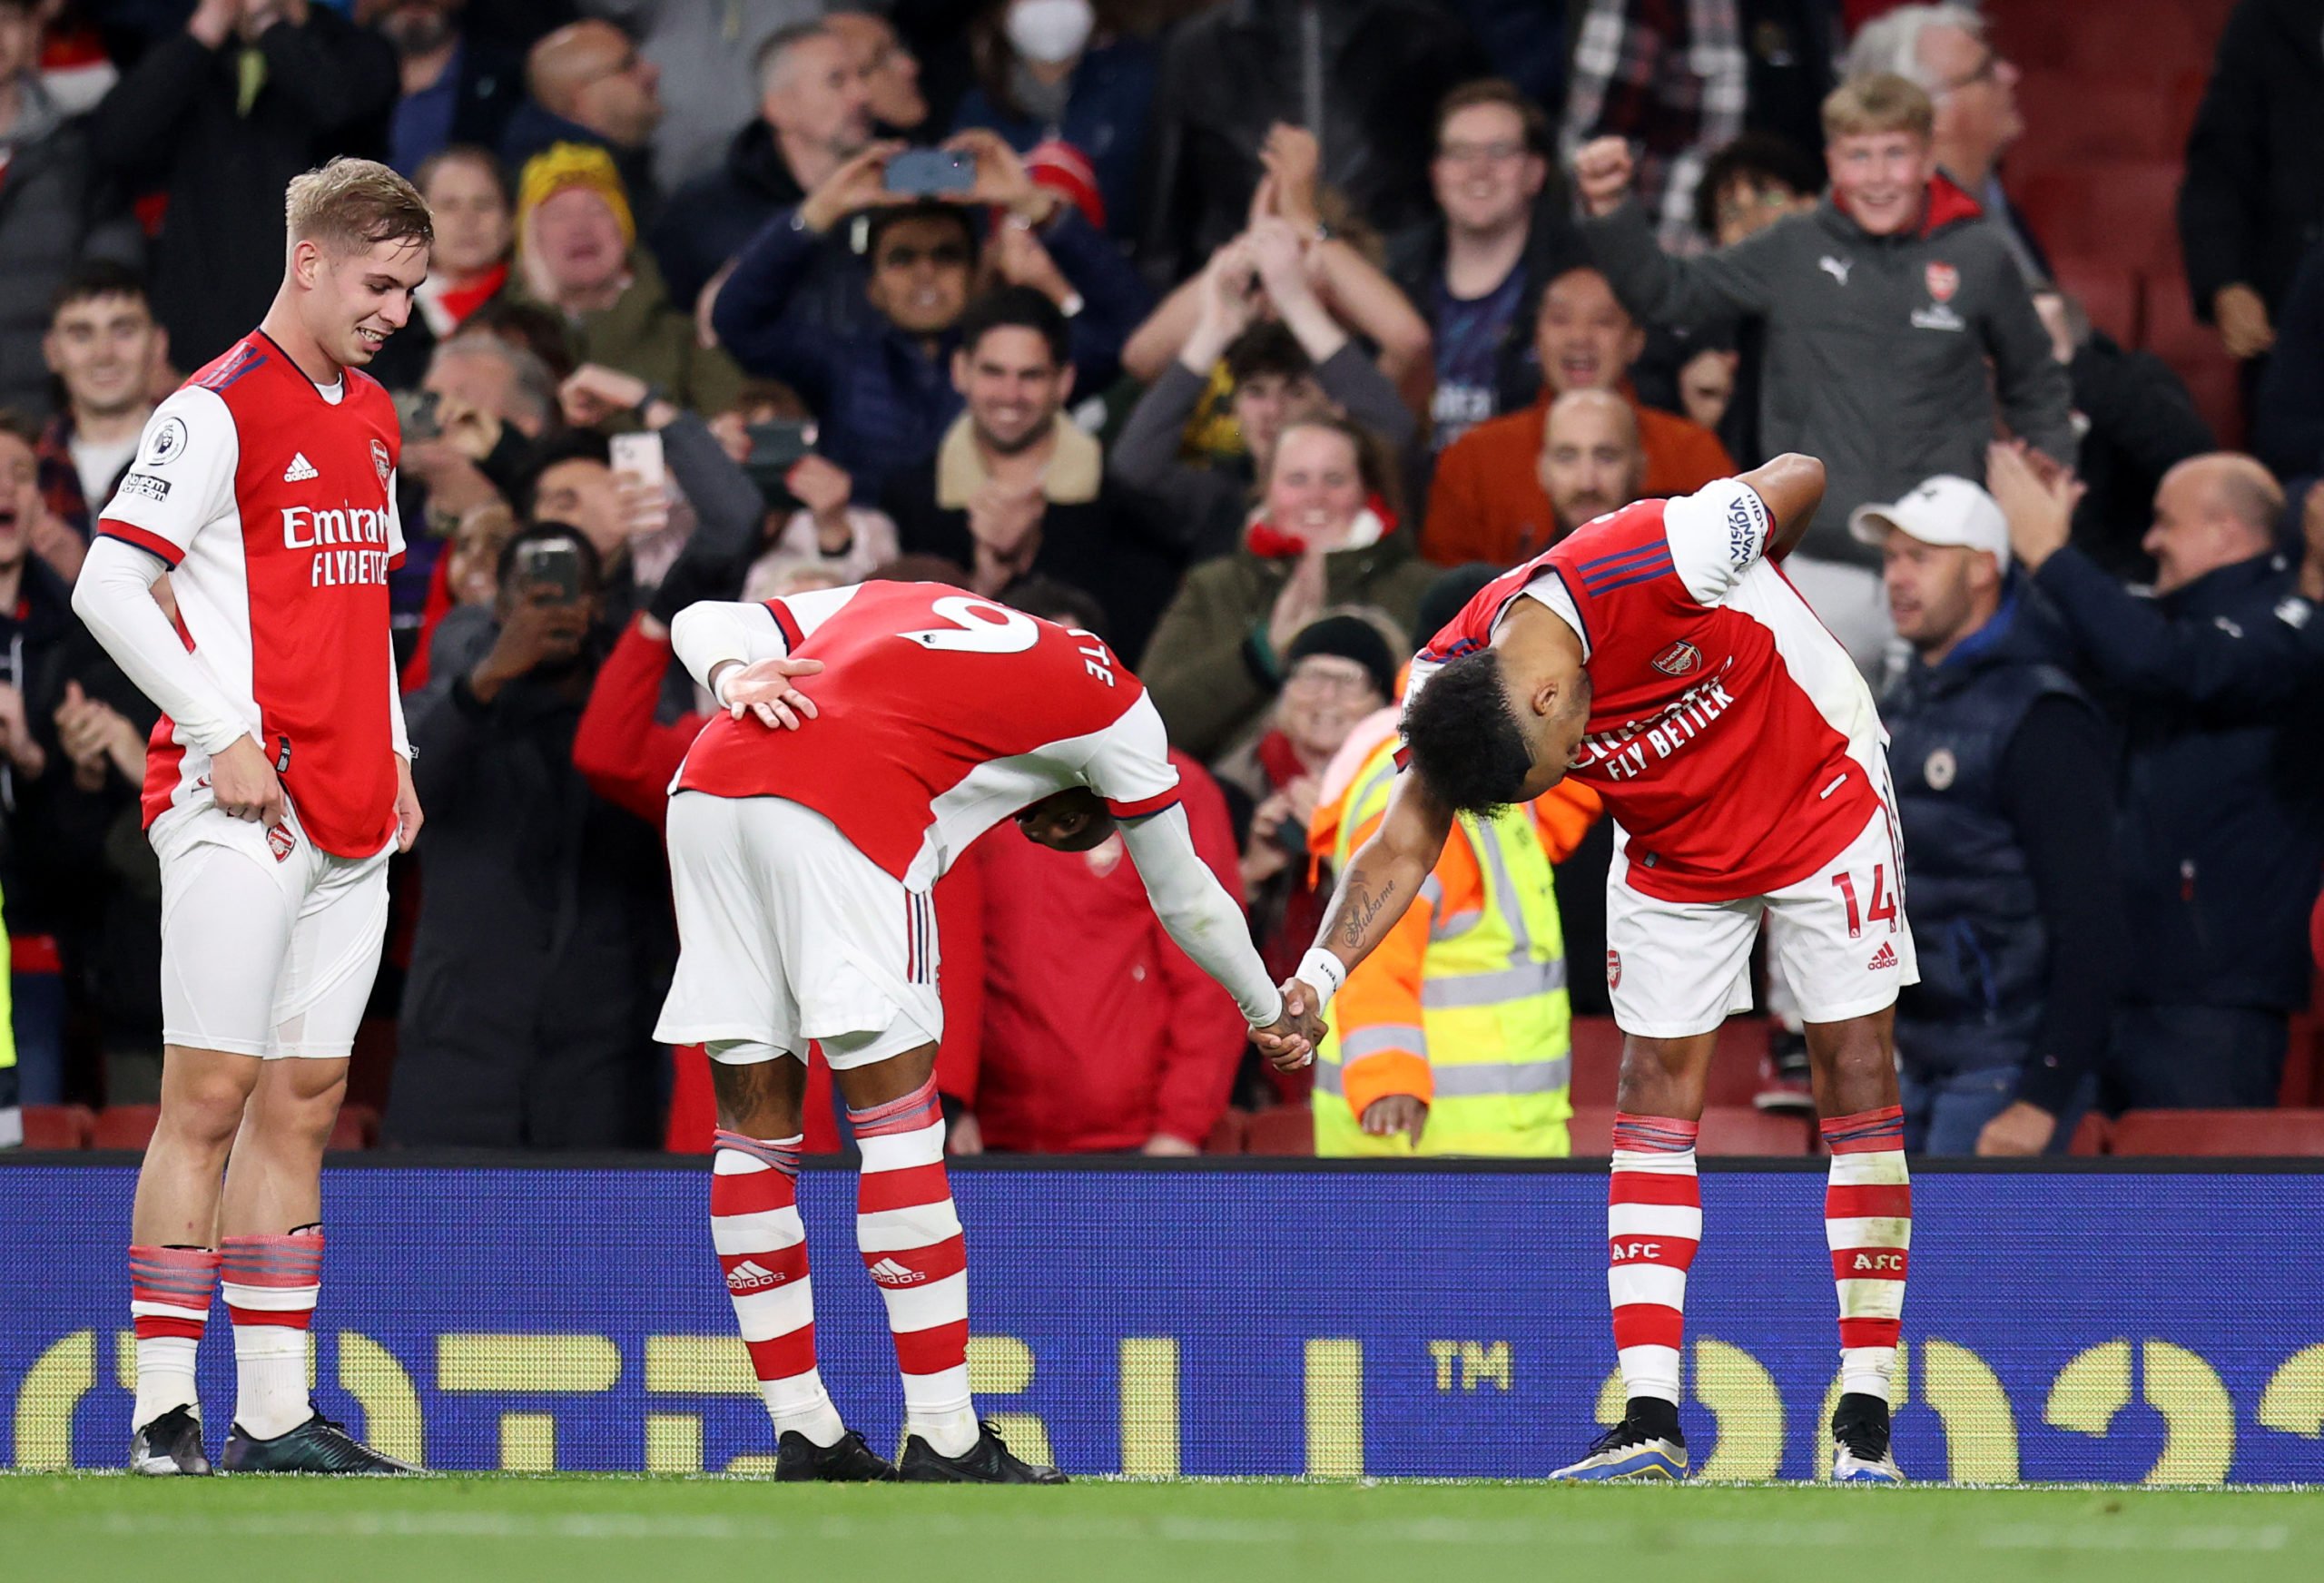 LONDON, ENGLAND - OCTOBER 22: Pierre-Emerick Aubameyang of Arsenal  celebrates with Alexandre Lacazette after scoring their team's second goal  during the Premier League match between Arsenal and Aston Villa at Emirates Stadium on October 22, 2021 in London, England. (Photo by Alex Pantling/Getty Images)
The 4th Official uses images provided by the following image agency: Getty Images (https://www.gettyimages.de/) Imago Images (https://www.imago-images.de/)